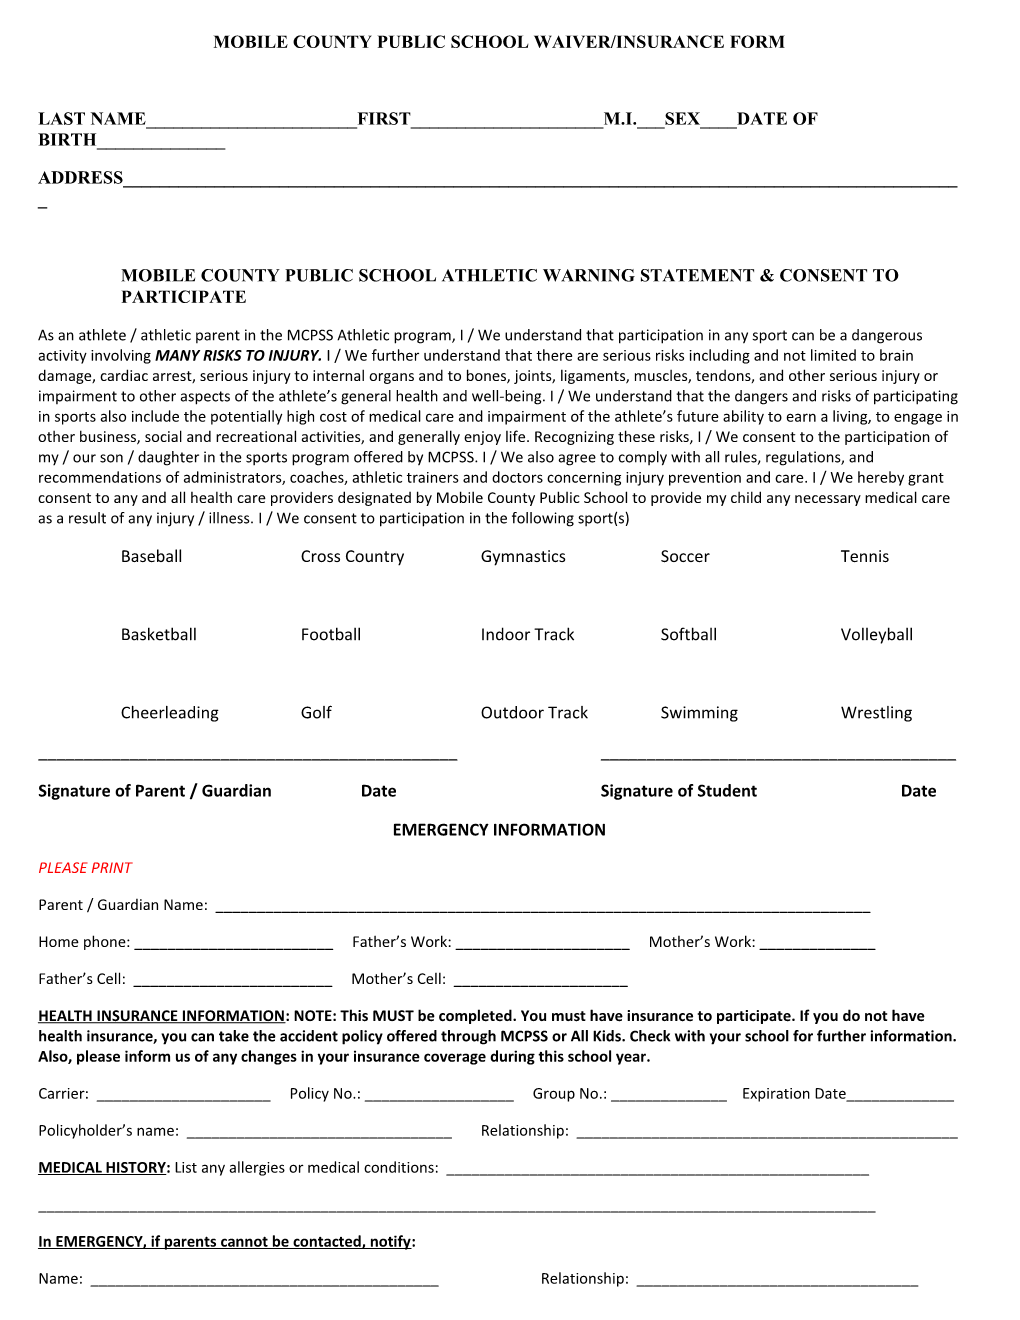 Mobile County Public School Waiver/Insurance Form